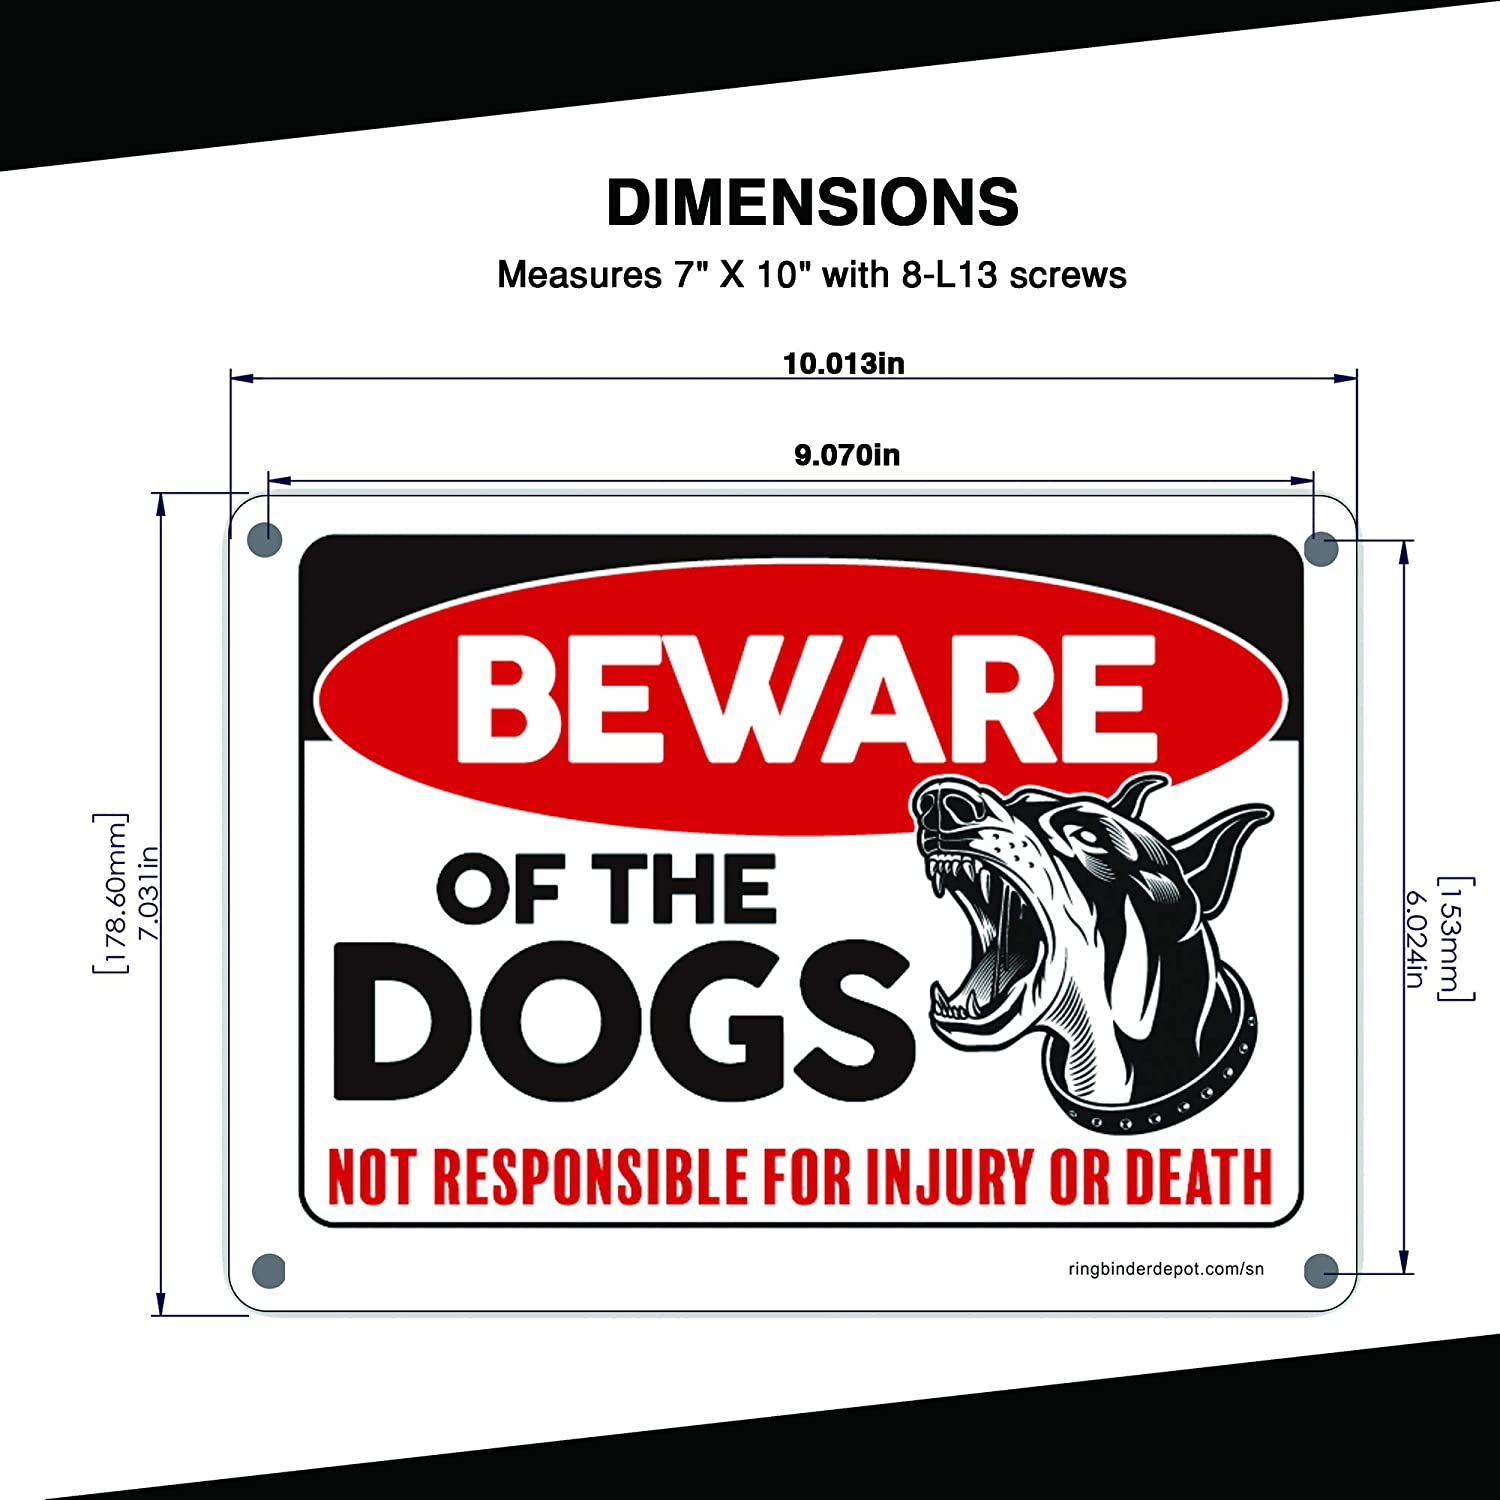 "Beware of dogs" sign